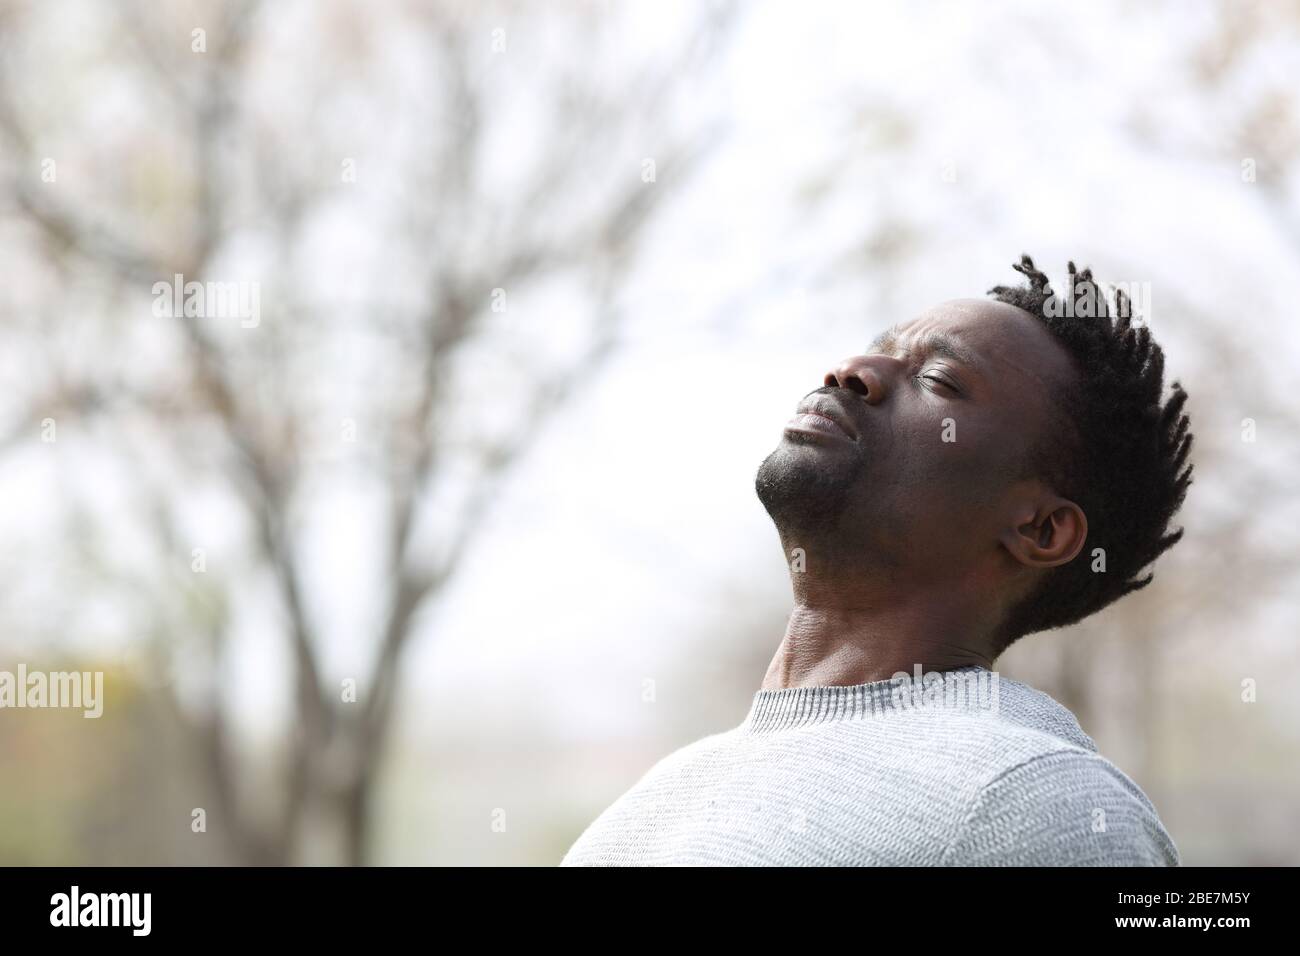 Black man breathing deep fresh air outdoors in winter in a park Stock Photo